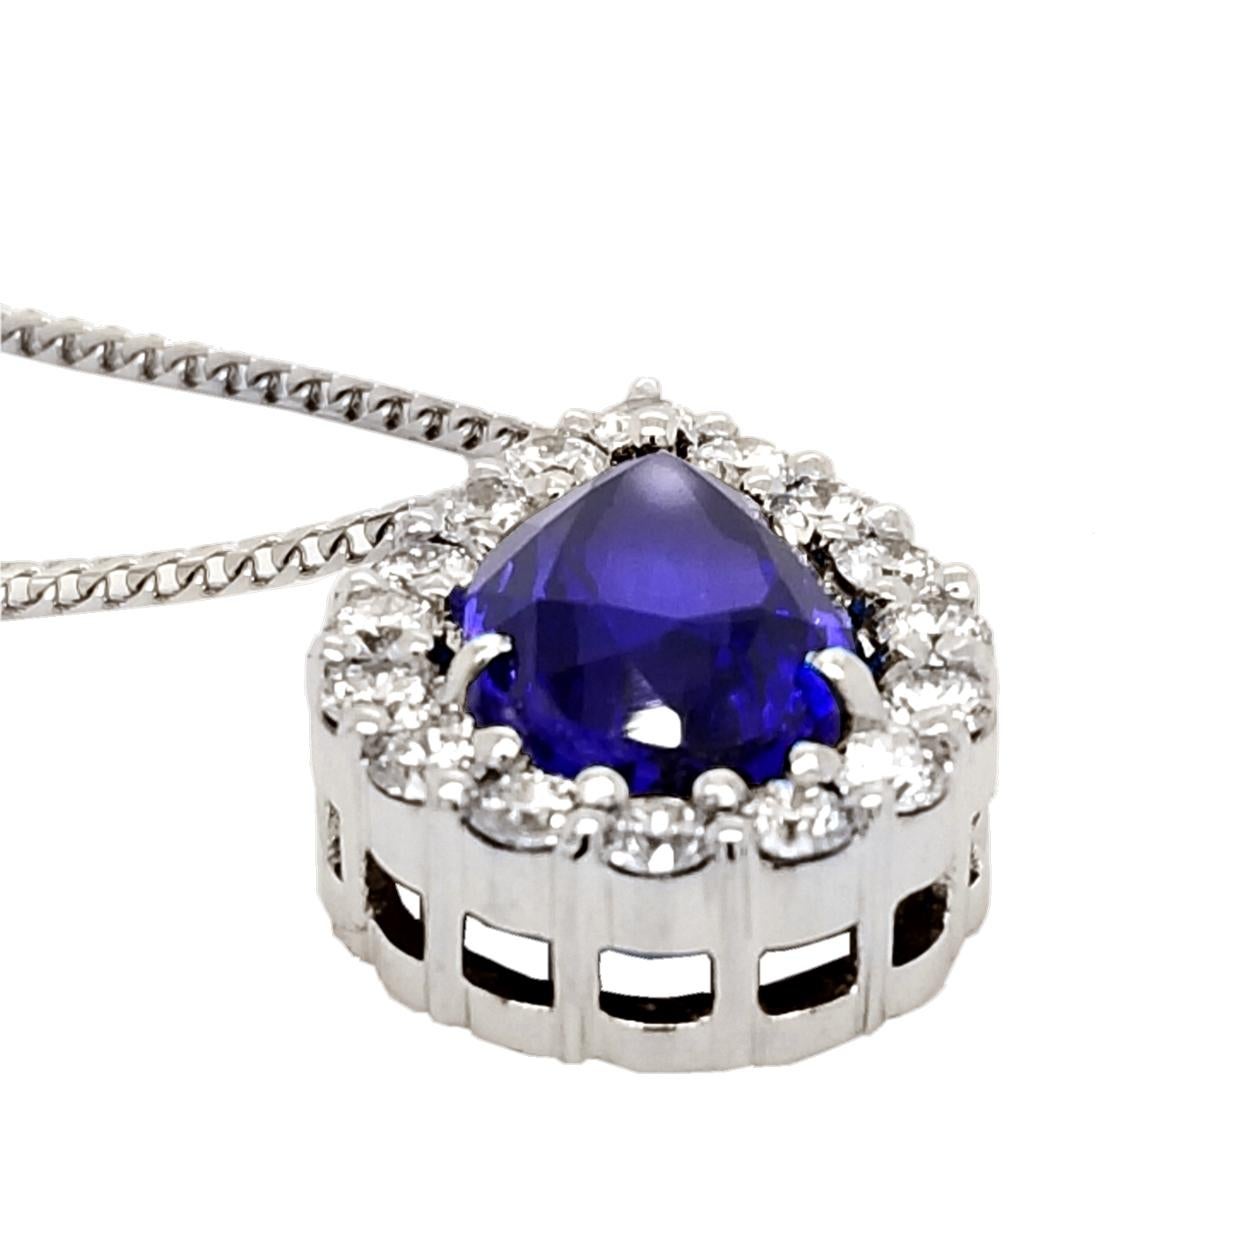 This Beautiful 18K Tear Drop Necklace with 16 2.6 mm Natural Round Diamonds total weight of 1.20 Ct (Shared Prong Set) hosts a magnificent color Tanzanite weighing 6.26 Ct.
Center Stone: 
GIA Certified 6.26 Ct Tanzanite
Dimension: 12.69x8.66x7.55